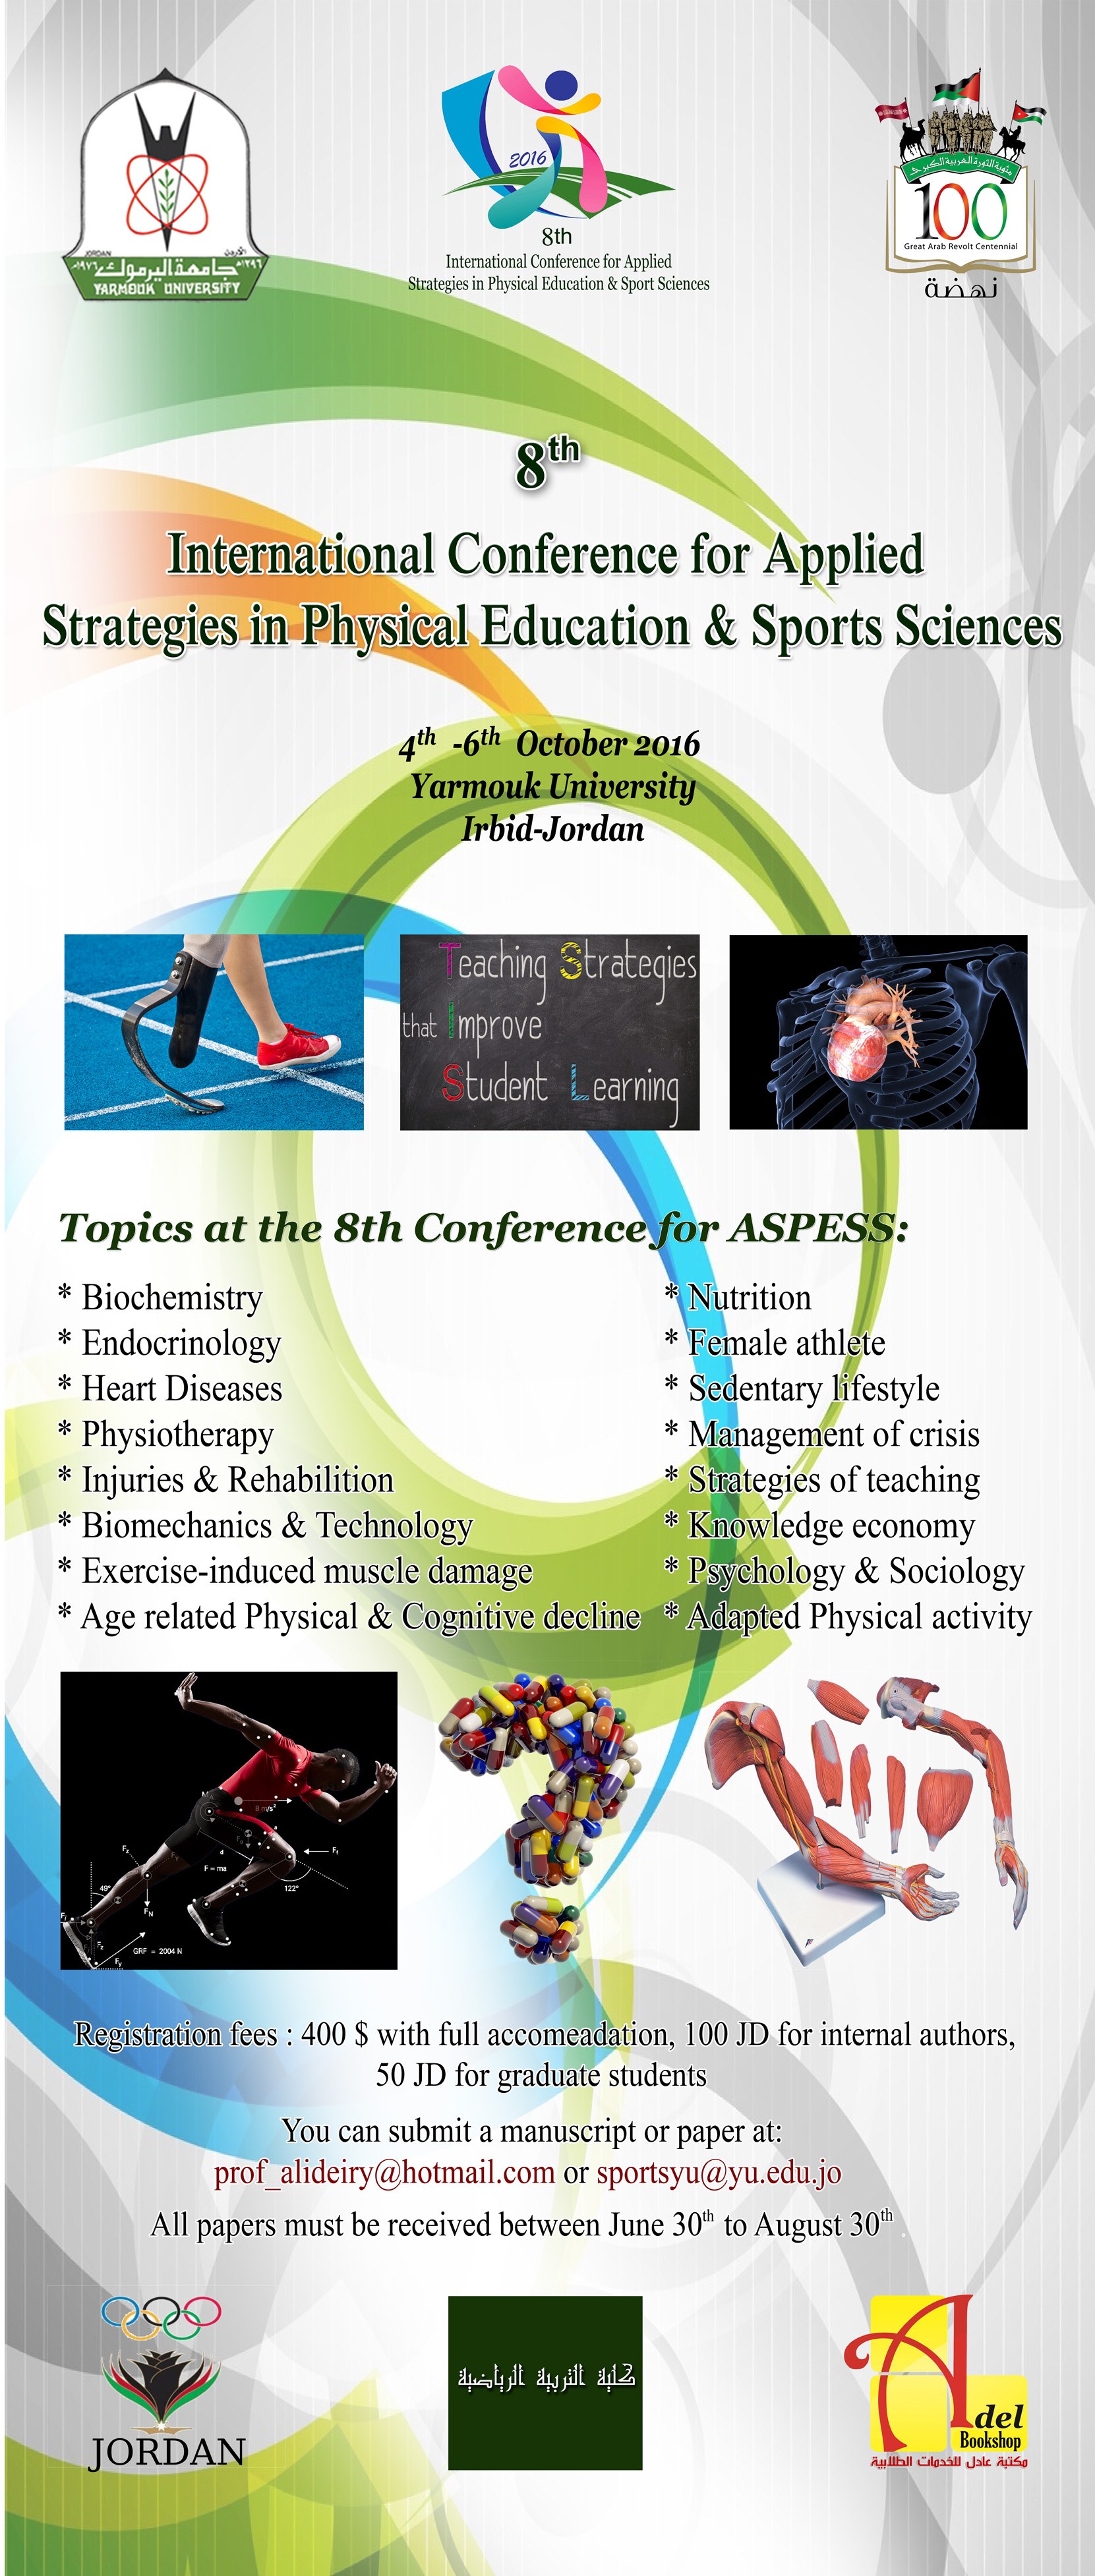 International ASPESS 2016: Applied Strategies in Physical Education and Sport Sciences - 8th Conference